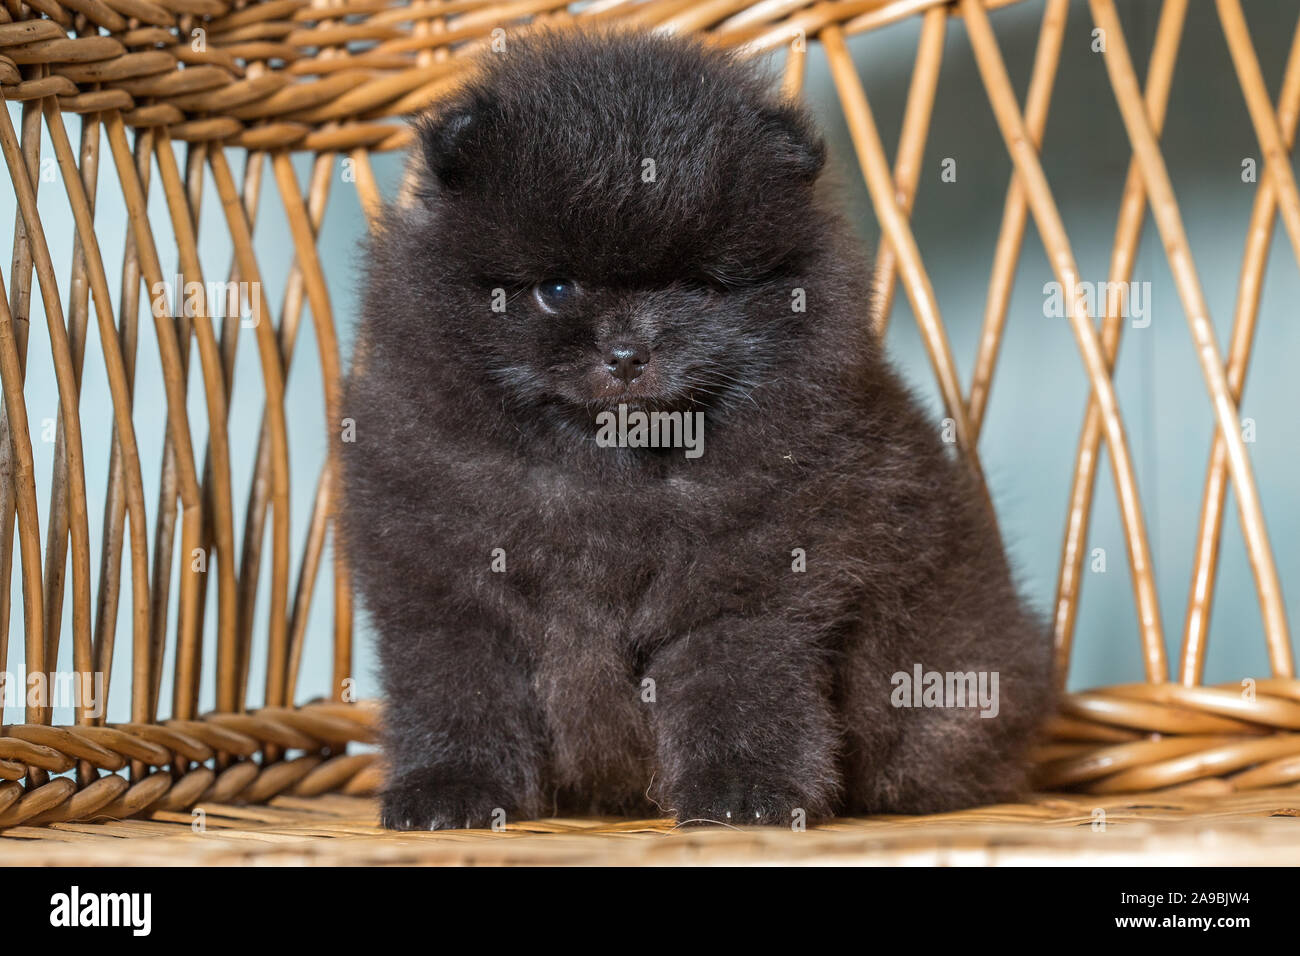 Cute puppy of miniature Pomeranian Spitz Zwergspitz or Dwarf Spitz on a chair. Small dog is two month old. Stock Photo